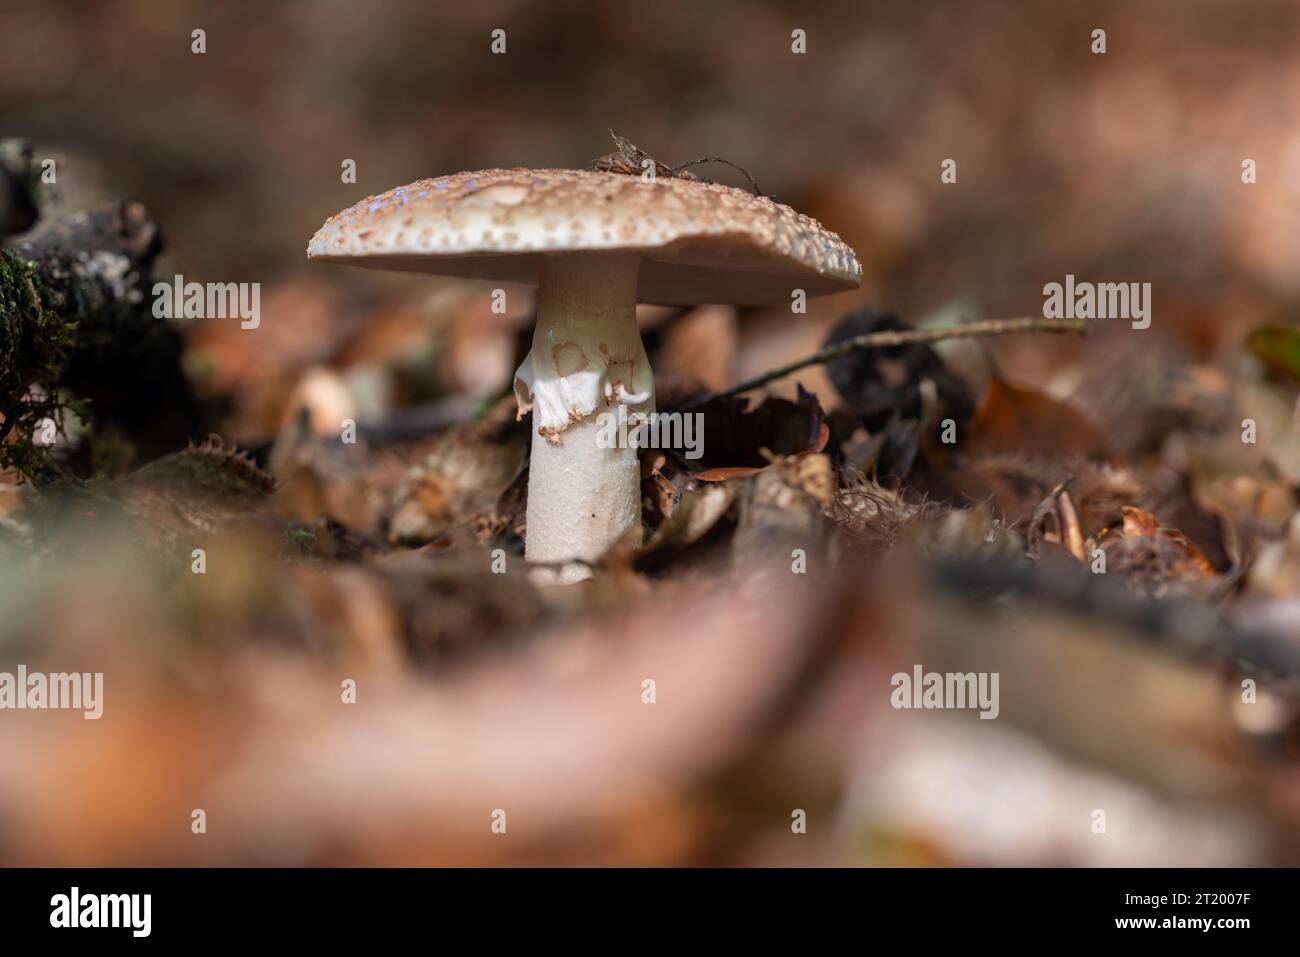 Single blusher mushroom on a forest floor, surrounded by fallen leaves. Stock Photo